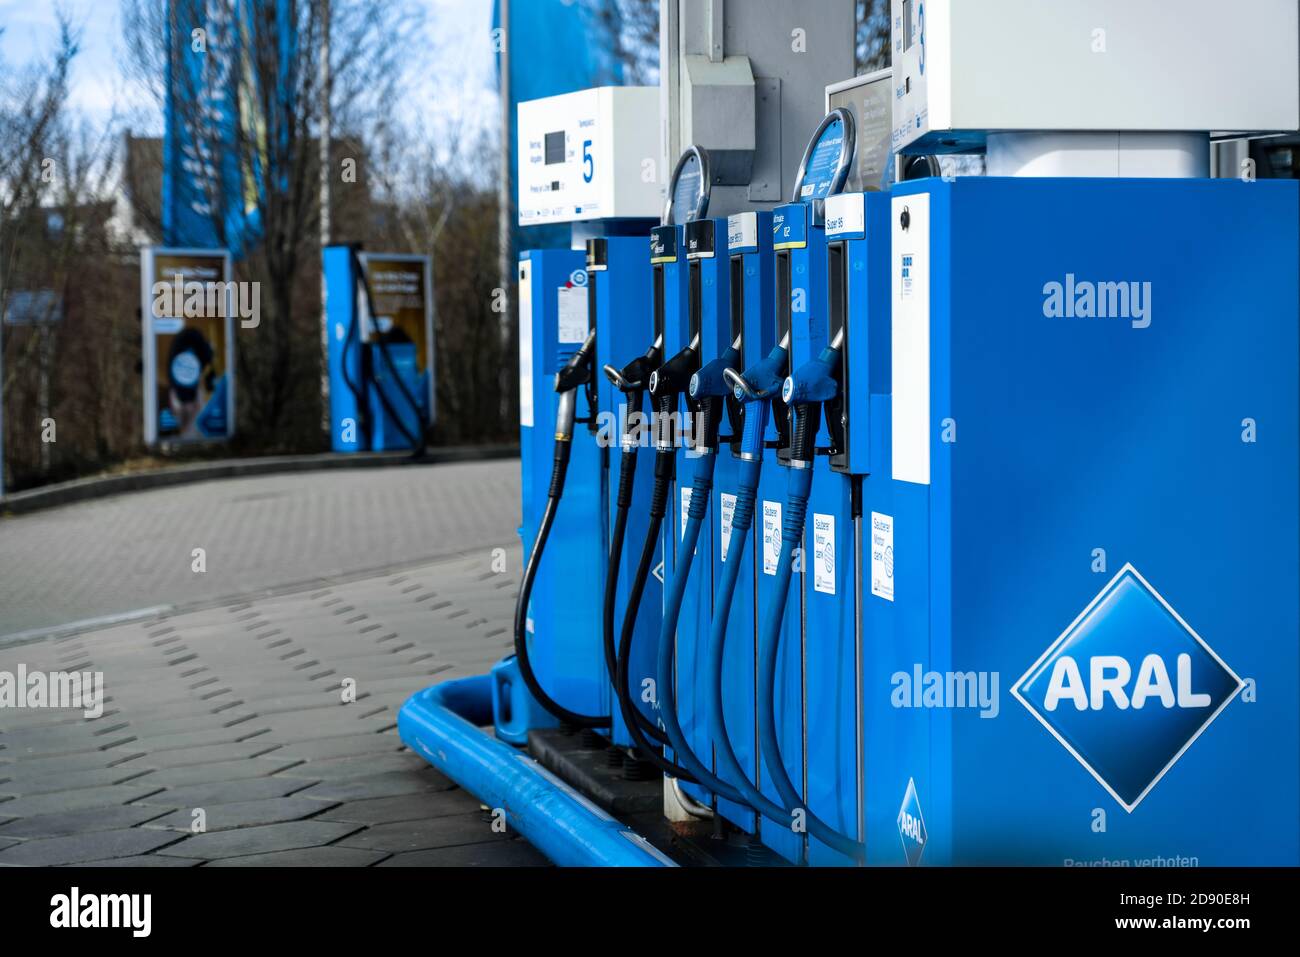 Aral gas station. Aral is a brand of automobile fuels and petrol stations, present in Germany and Luxembourg. Aral is owned by BP. Stock Photo